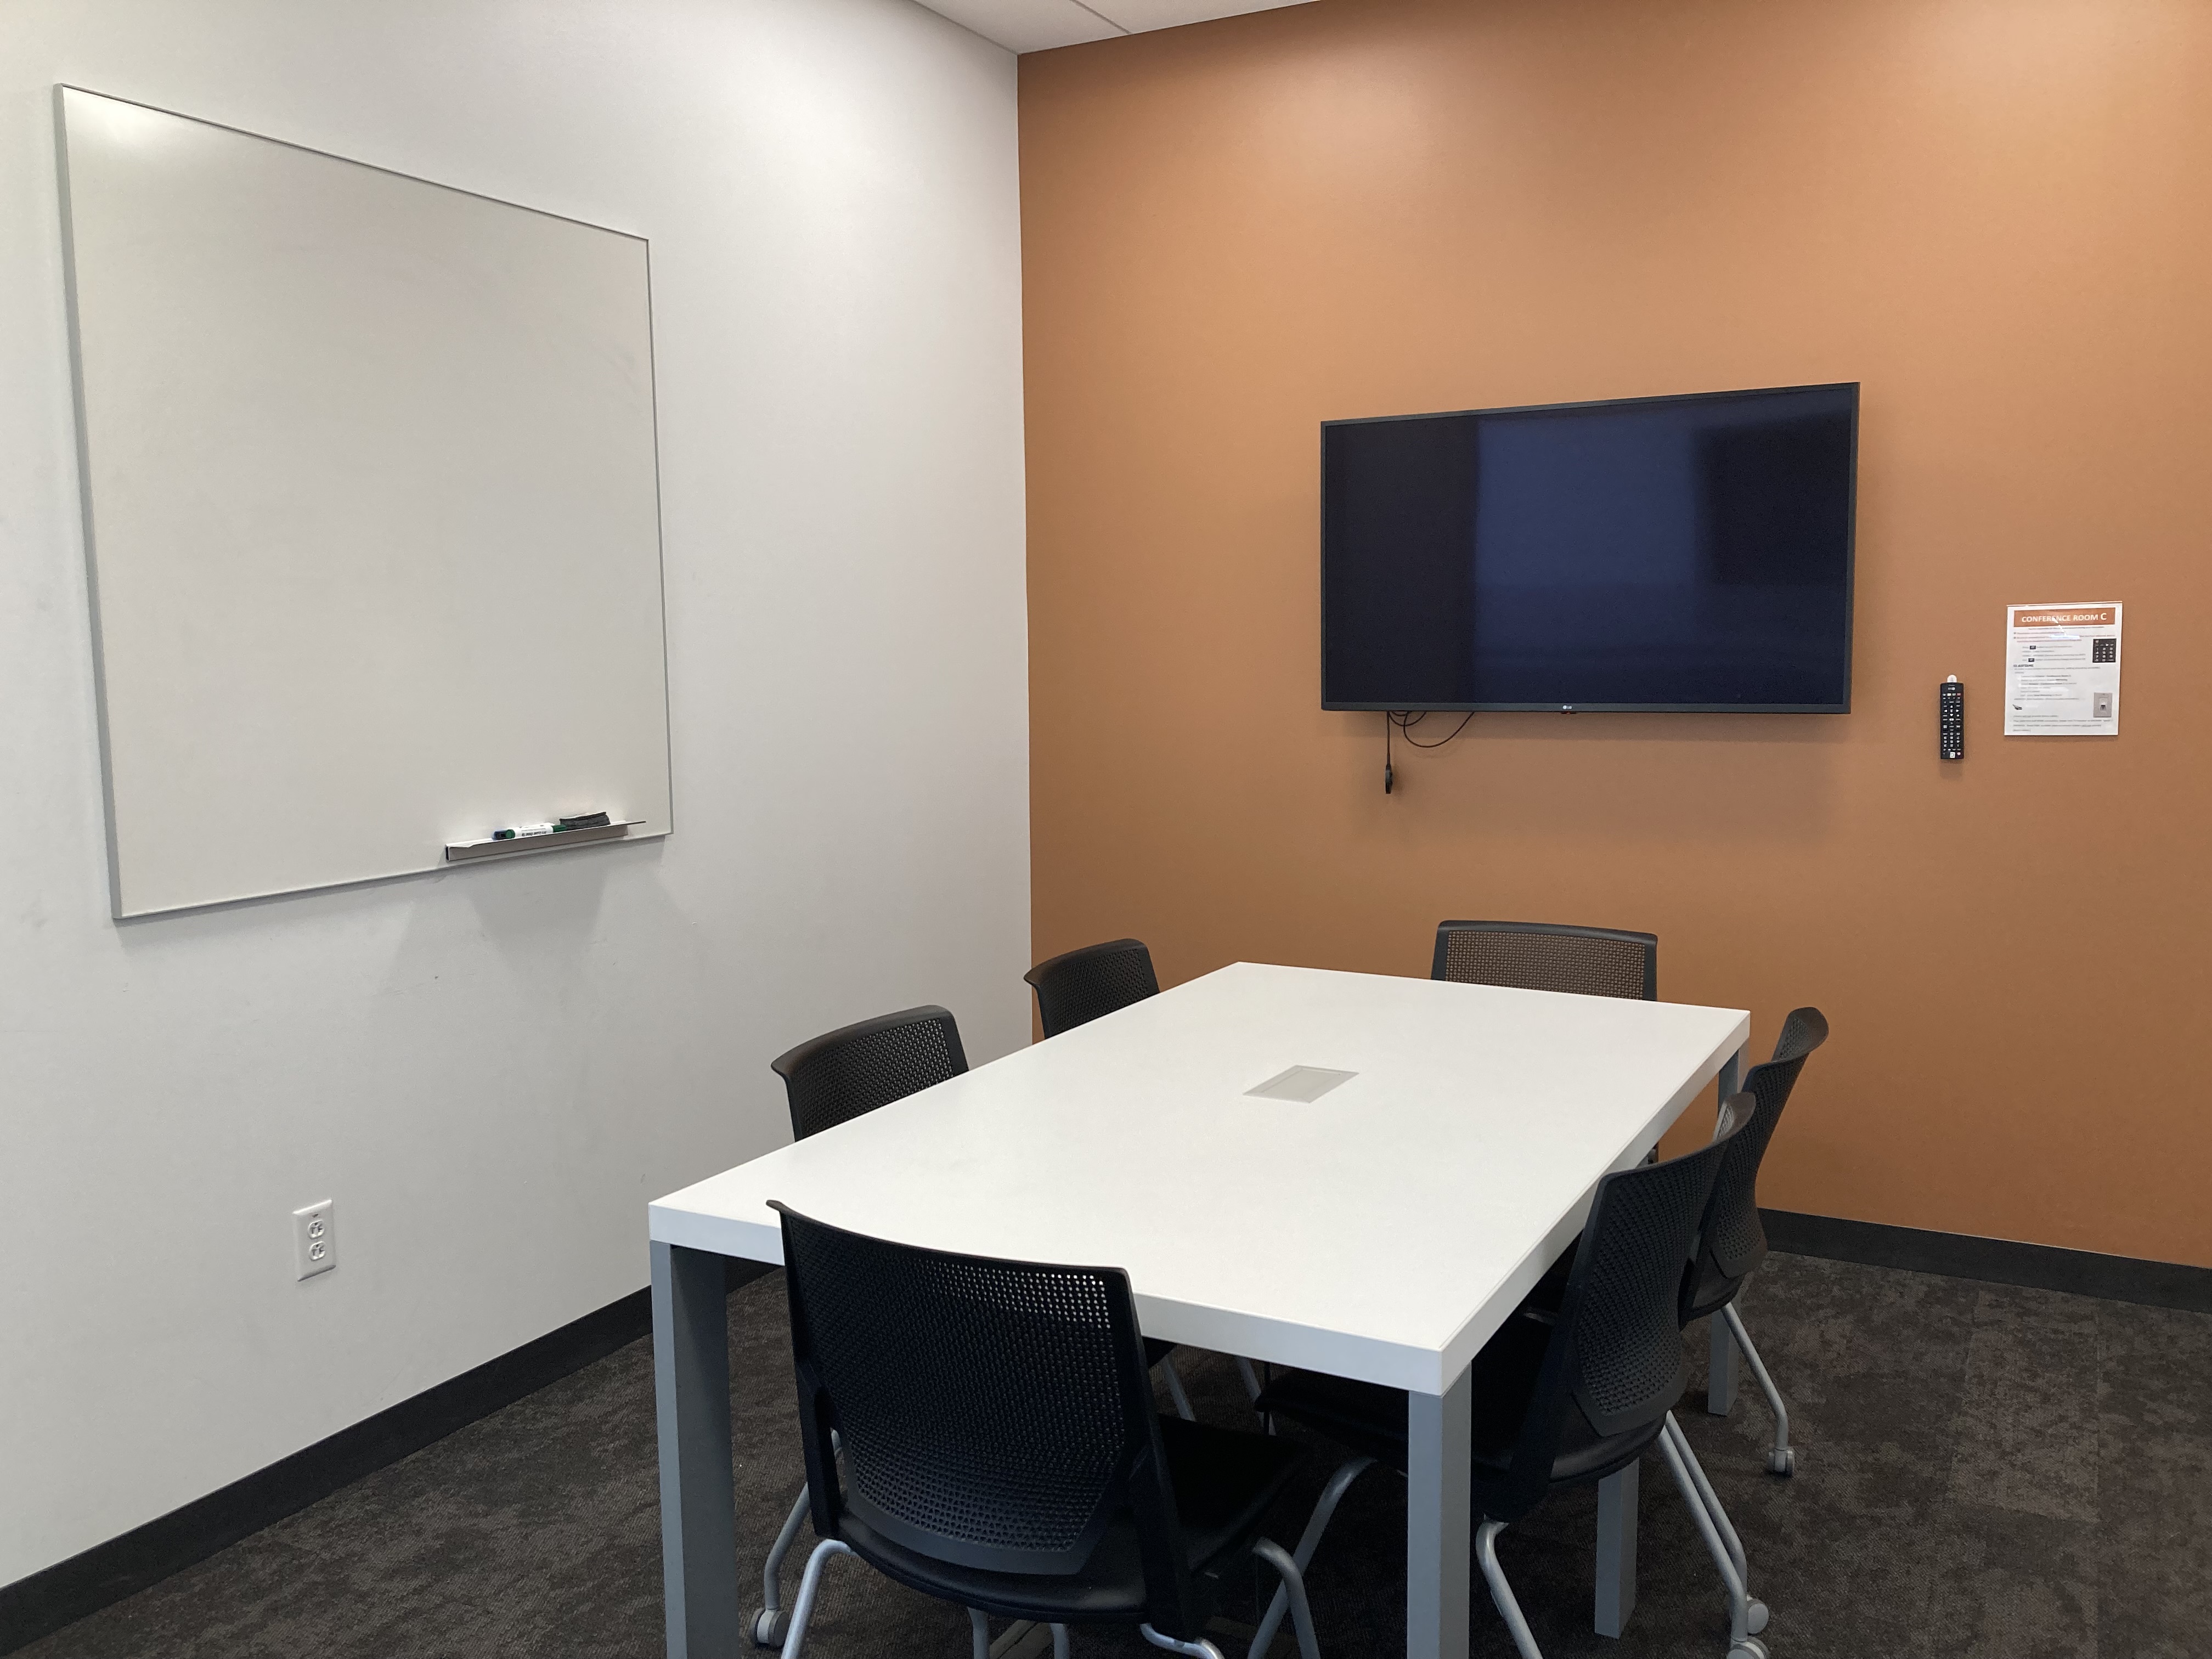 mage of conference room with white table, six chairs, white board on wall and mounted television on back orange wall.